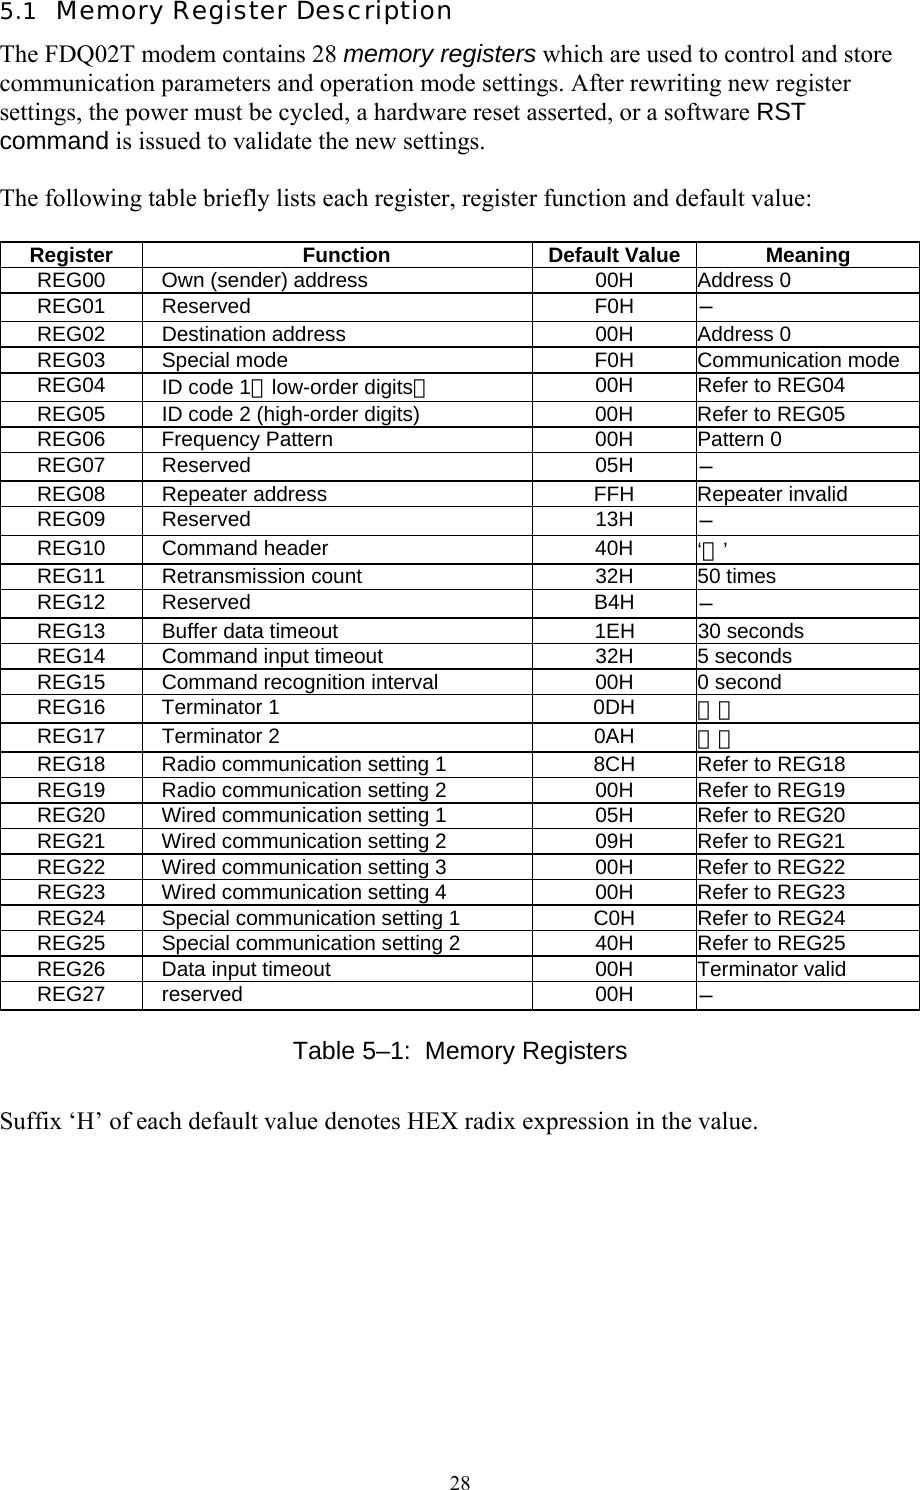  28 5.1  Memory Register Description The FDQ02T modem contains 28 memory registers which are used to control and store communication parameters and operation mode settings. After rewriting new register settings, the power must be cycled, a hardware reset asserted, or a software RST command is issued to validate the new settings.  The following table briefly lists each register, register function and default value:  Register   Function  Default Value Meaning REG00    Own (sender) address  00H  Address 0 REG01  Reserved  F0H  − REG02  Destination address 00H Address 0 REG03    Special mode  F0H  Communication mode REG04  ID code 1（low-order digits） 00H  Refer to REG04 REG05    ID code 2 (high-order digits)  00H  Refer to REG05 REG06    Frequency Pattern  00H  Pattern 0 REG07  Reserved  05H  − REG08    Repeater address  FFH  Repeater invalid REG09  Reserved  13H  − REG10  Command header  40H  ‘＠’ REG11    Retransmission count  32H  50 times REG12  Reserved   B4H  − REG13    Buffer data timeout  1EH  30 seconds REG14    Command input timeout  32H  5 seconds REG15    Command recognition interval  00H  0 second REG16  Terminator 1  0DH  ＣＲ REG17  Terminator 2  0AH  ＬＦ REG18    Radio communication setting 1  8CH  Refer to REG18  REG19    Radio communication setting 2  00H  Refer to REG19 REG20    Wired communication setting 1  05H  Refer to REG20 REG21    Wired communication setting 2  09H  Refer to REG21 REG22    Wired communication setting 3  00H  Refer to REG22 REG23    Wired communication setting 4  00H  Refer to REG23 REG24    Special communication setting 1  C0H  Refer to REG24 REG25    Special communication setting 2  40H  Refer to REG25 REG26    Data input timeout  00H  Terminator valid REG27  reserved  00H  − Table 5–1:  Memory Registers Suffix ‘H’ of each default value denotes HEX radix expression in the value. 